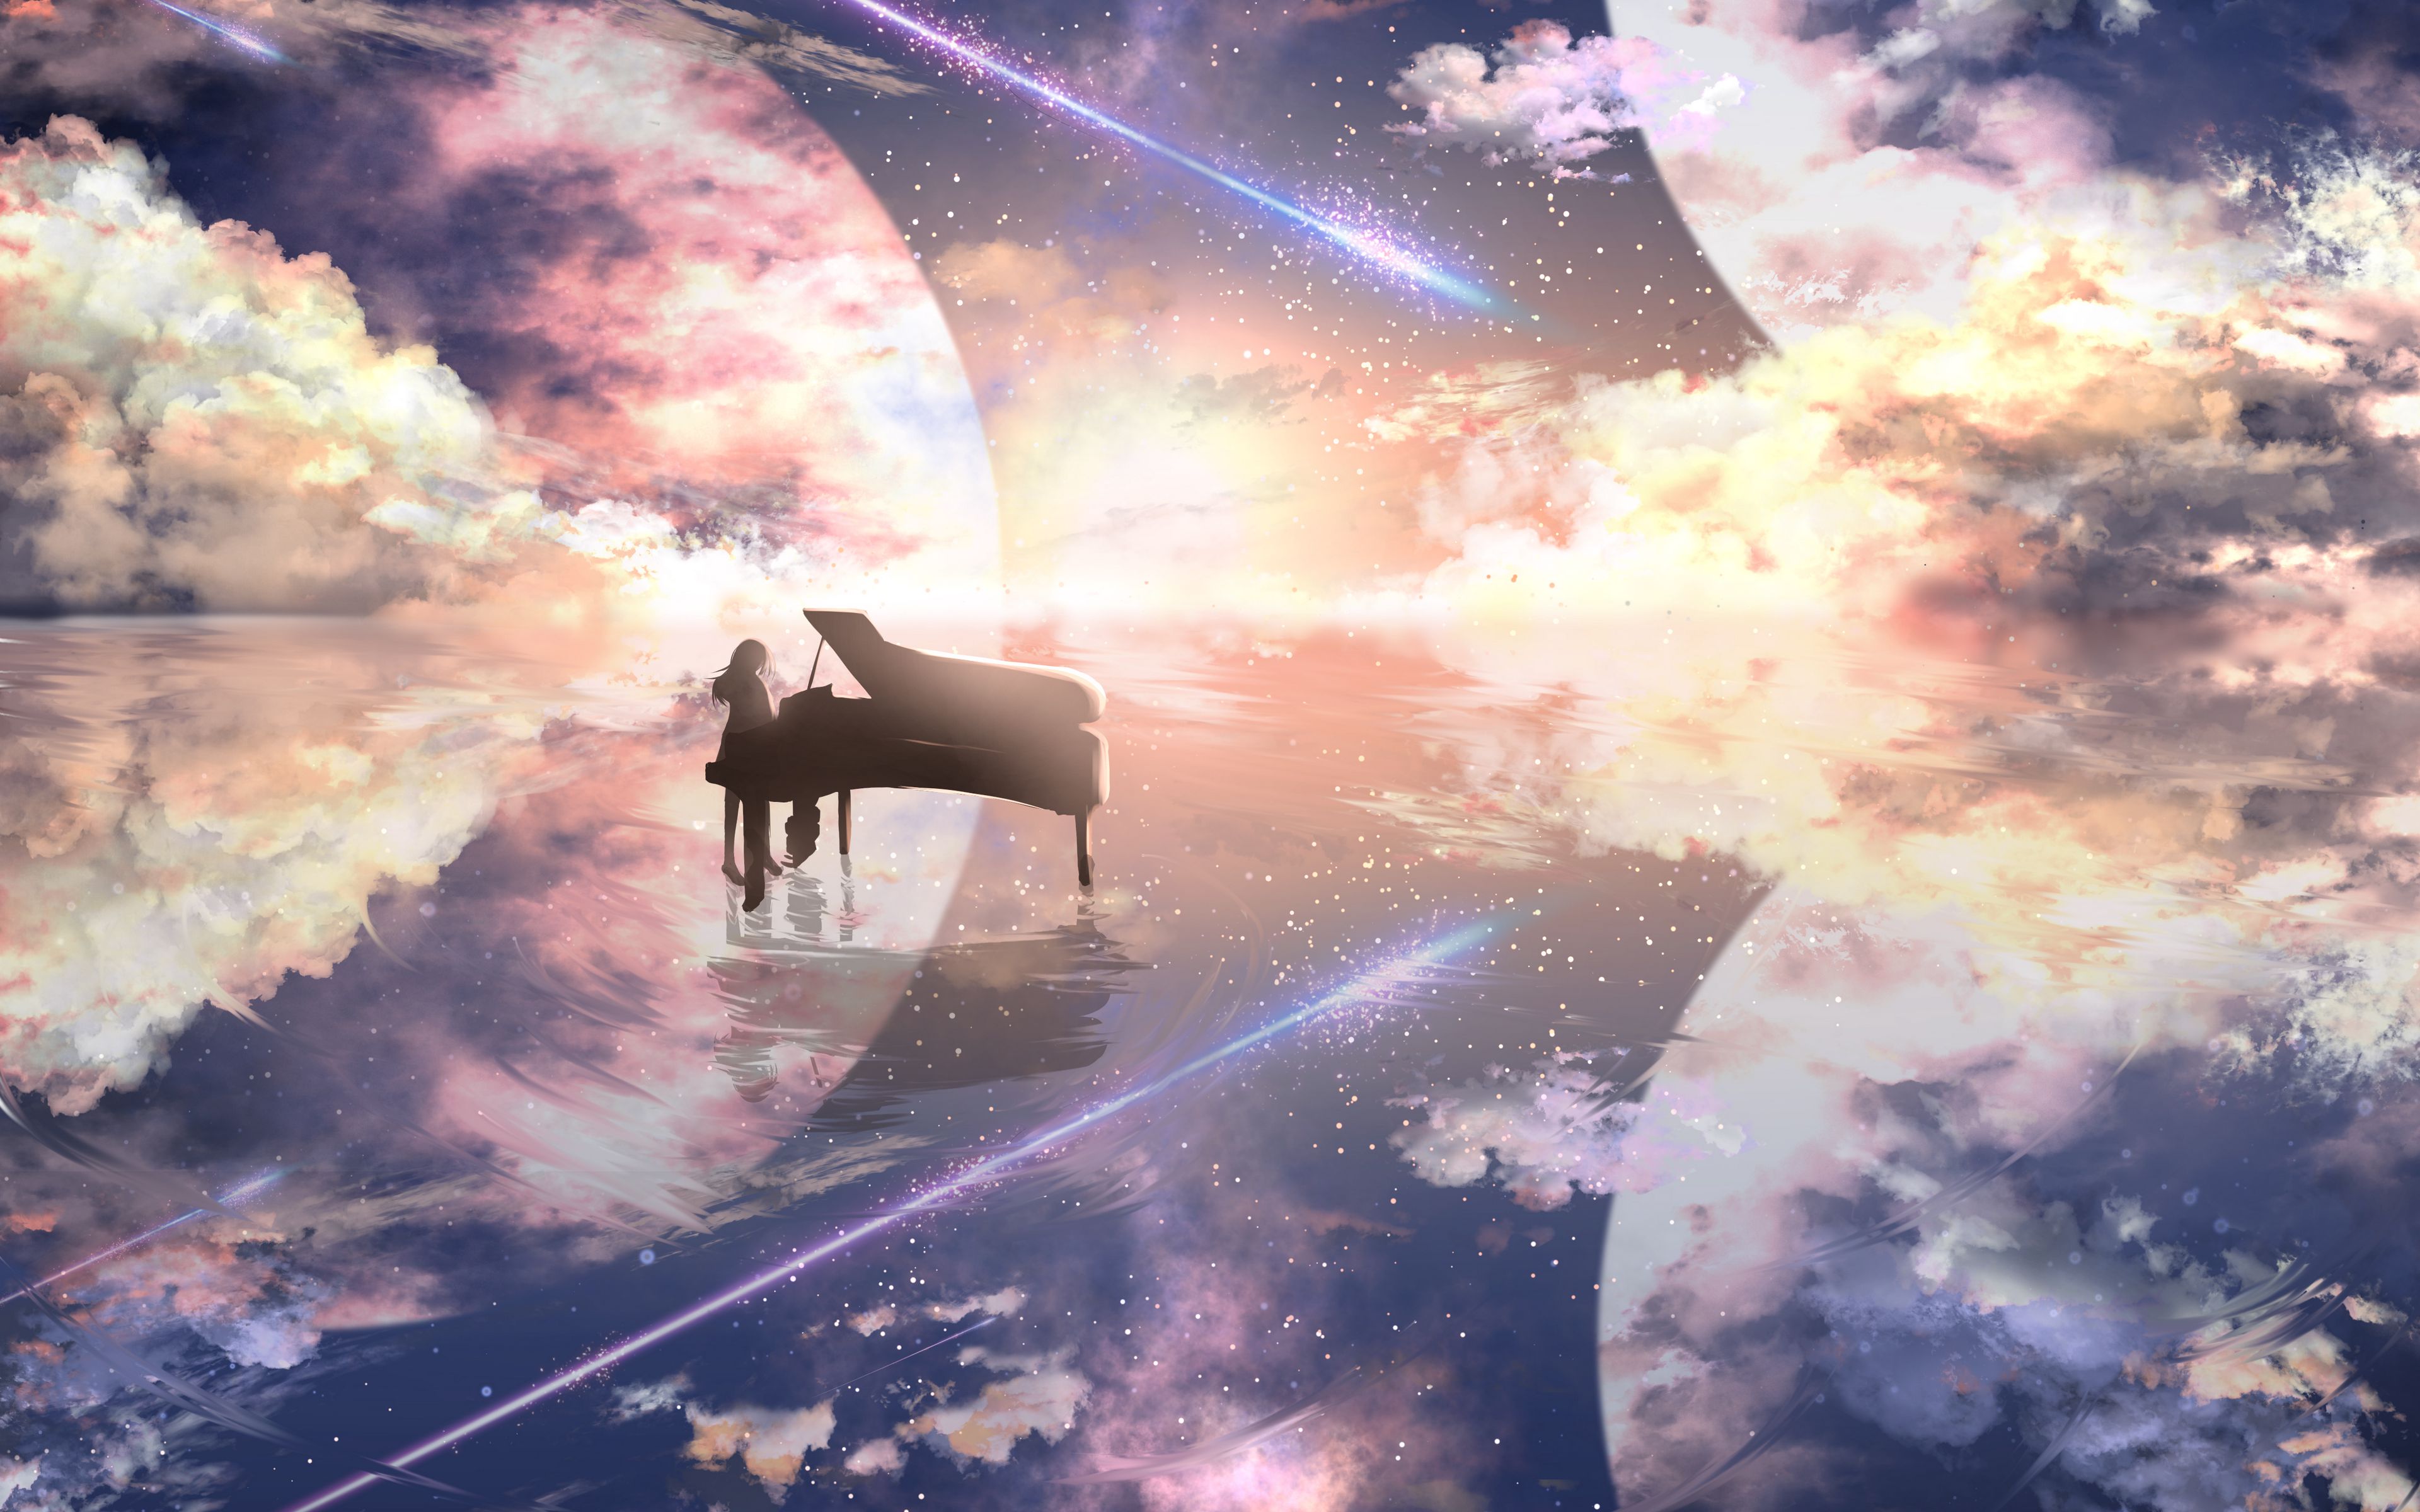 Download wallpaper 3840x2400 piano, silhouette, space, illusion, anime 4k ultra HD 16:10 HD background